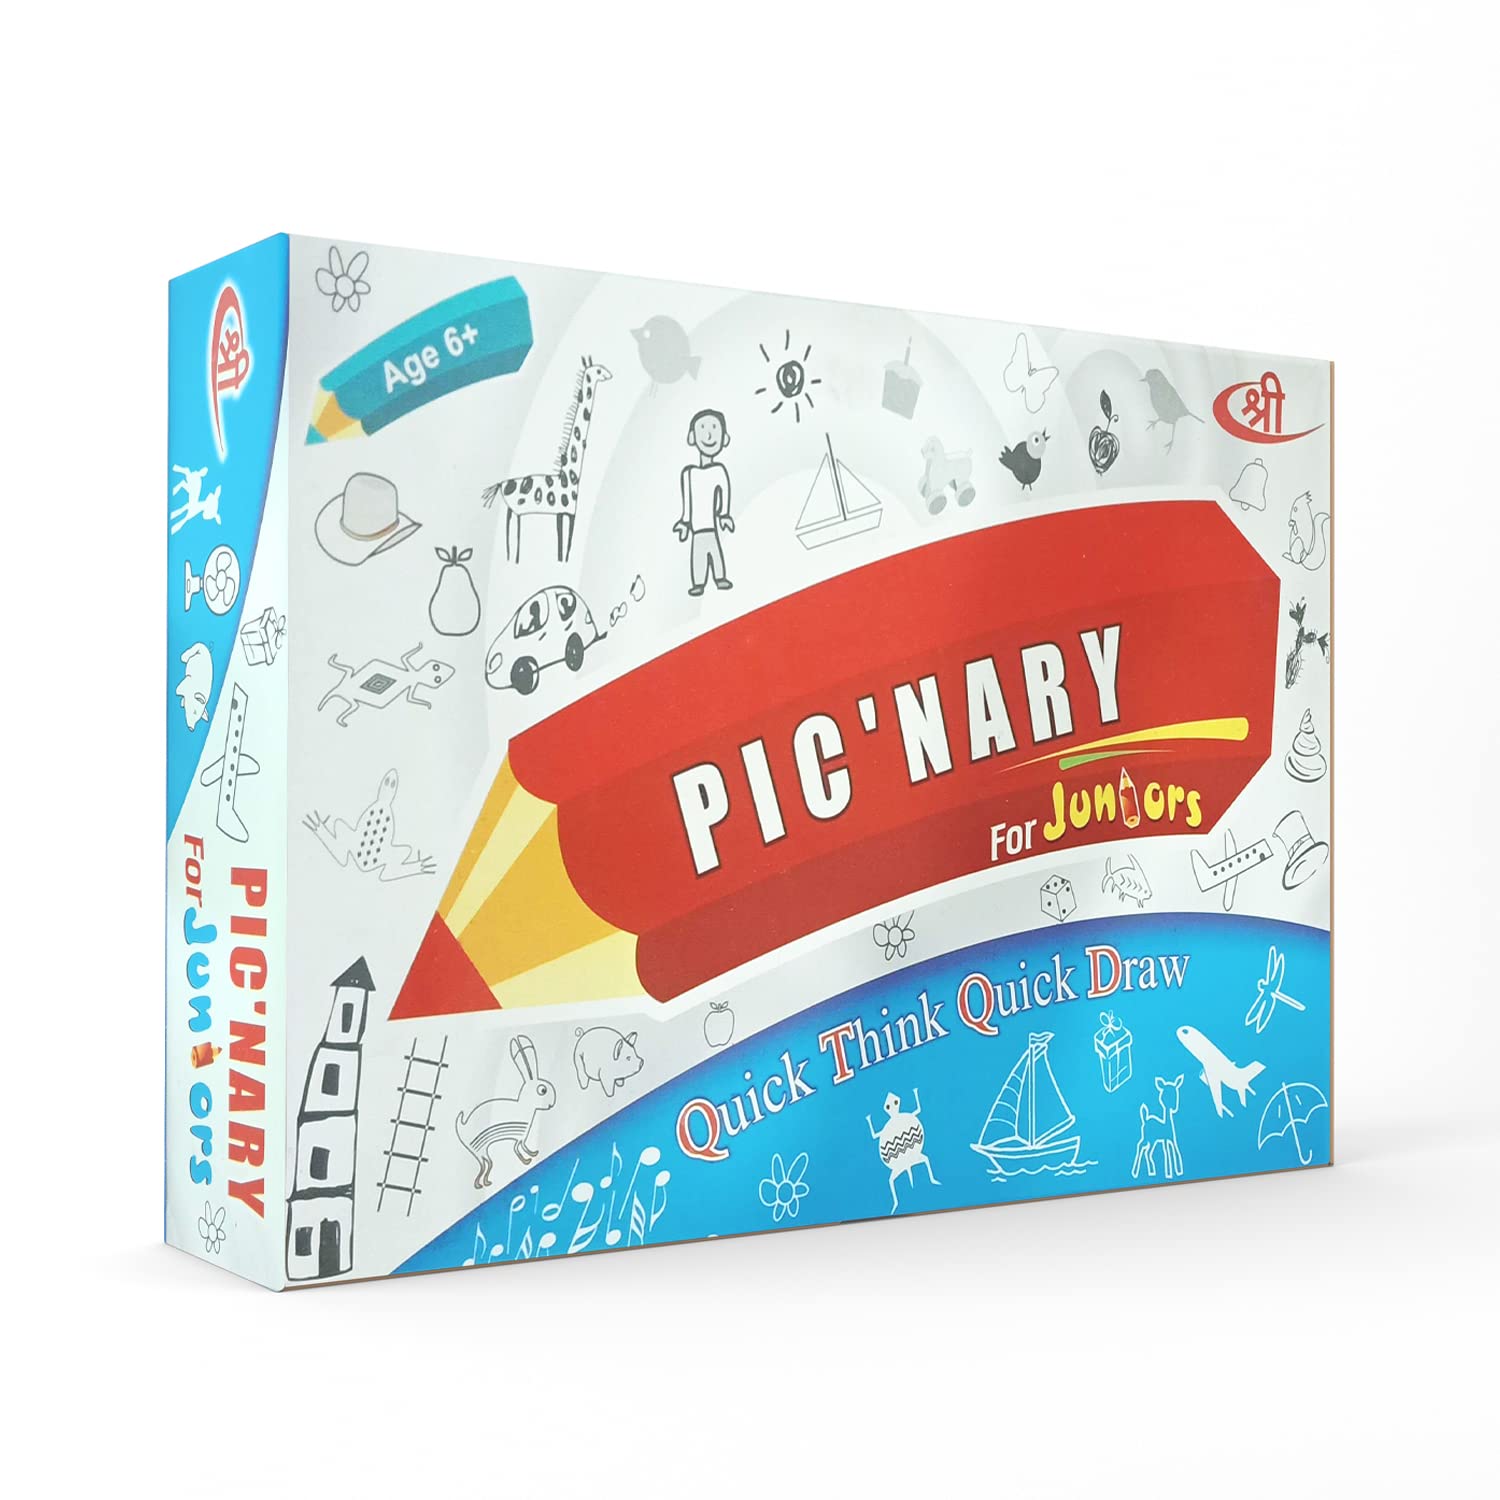 Kids Mandi Picnary Junior Game and Learning Kit for Kids.